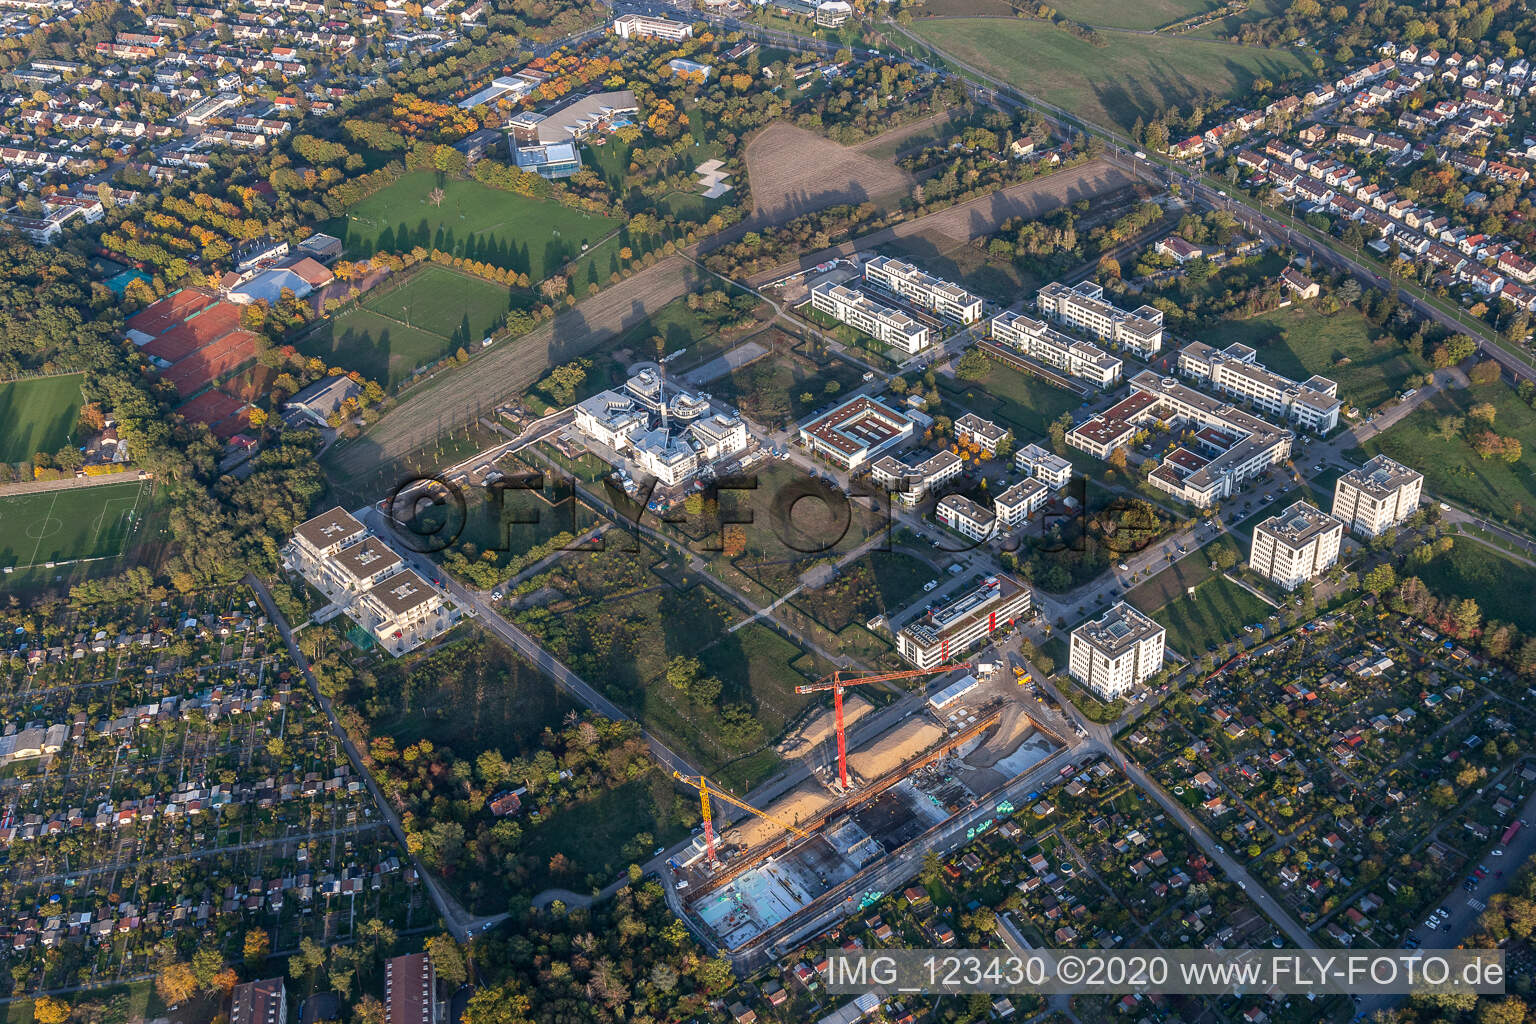 Technology park Karlsruhe in the district Rintheim in Karlsruhe in the state Baden-Wuerttemberg, Germany from above